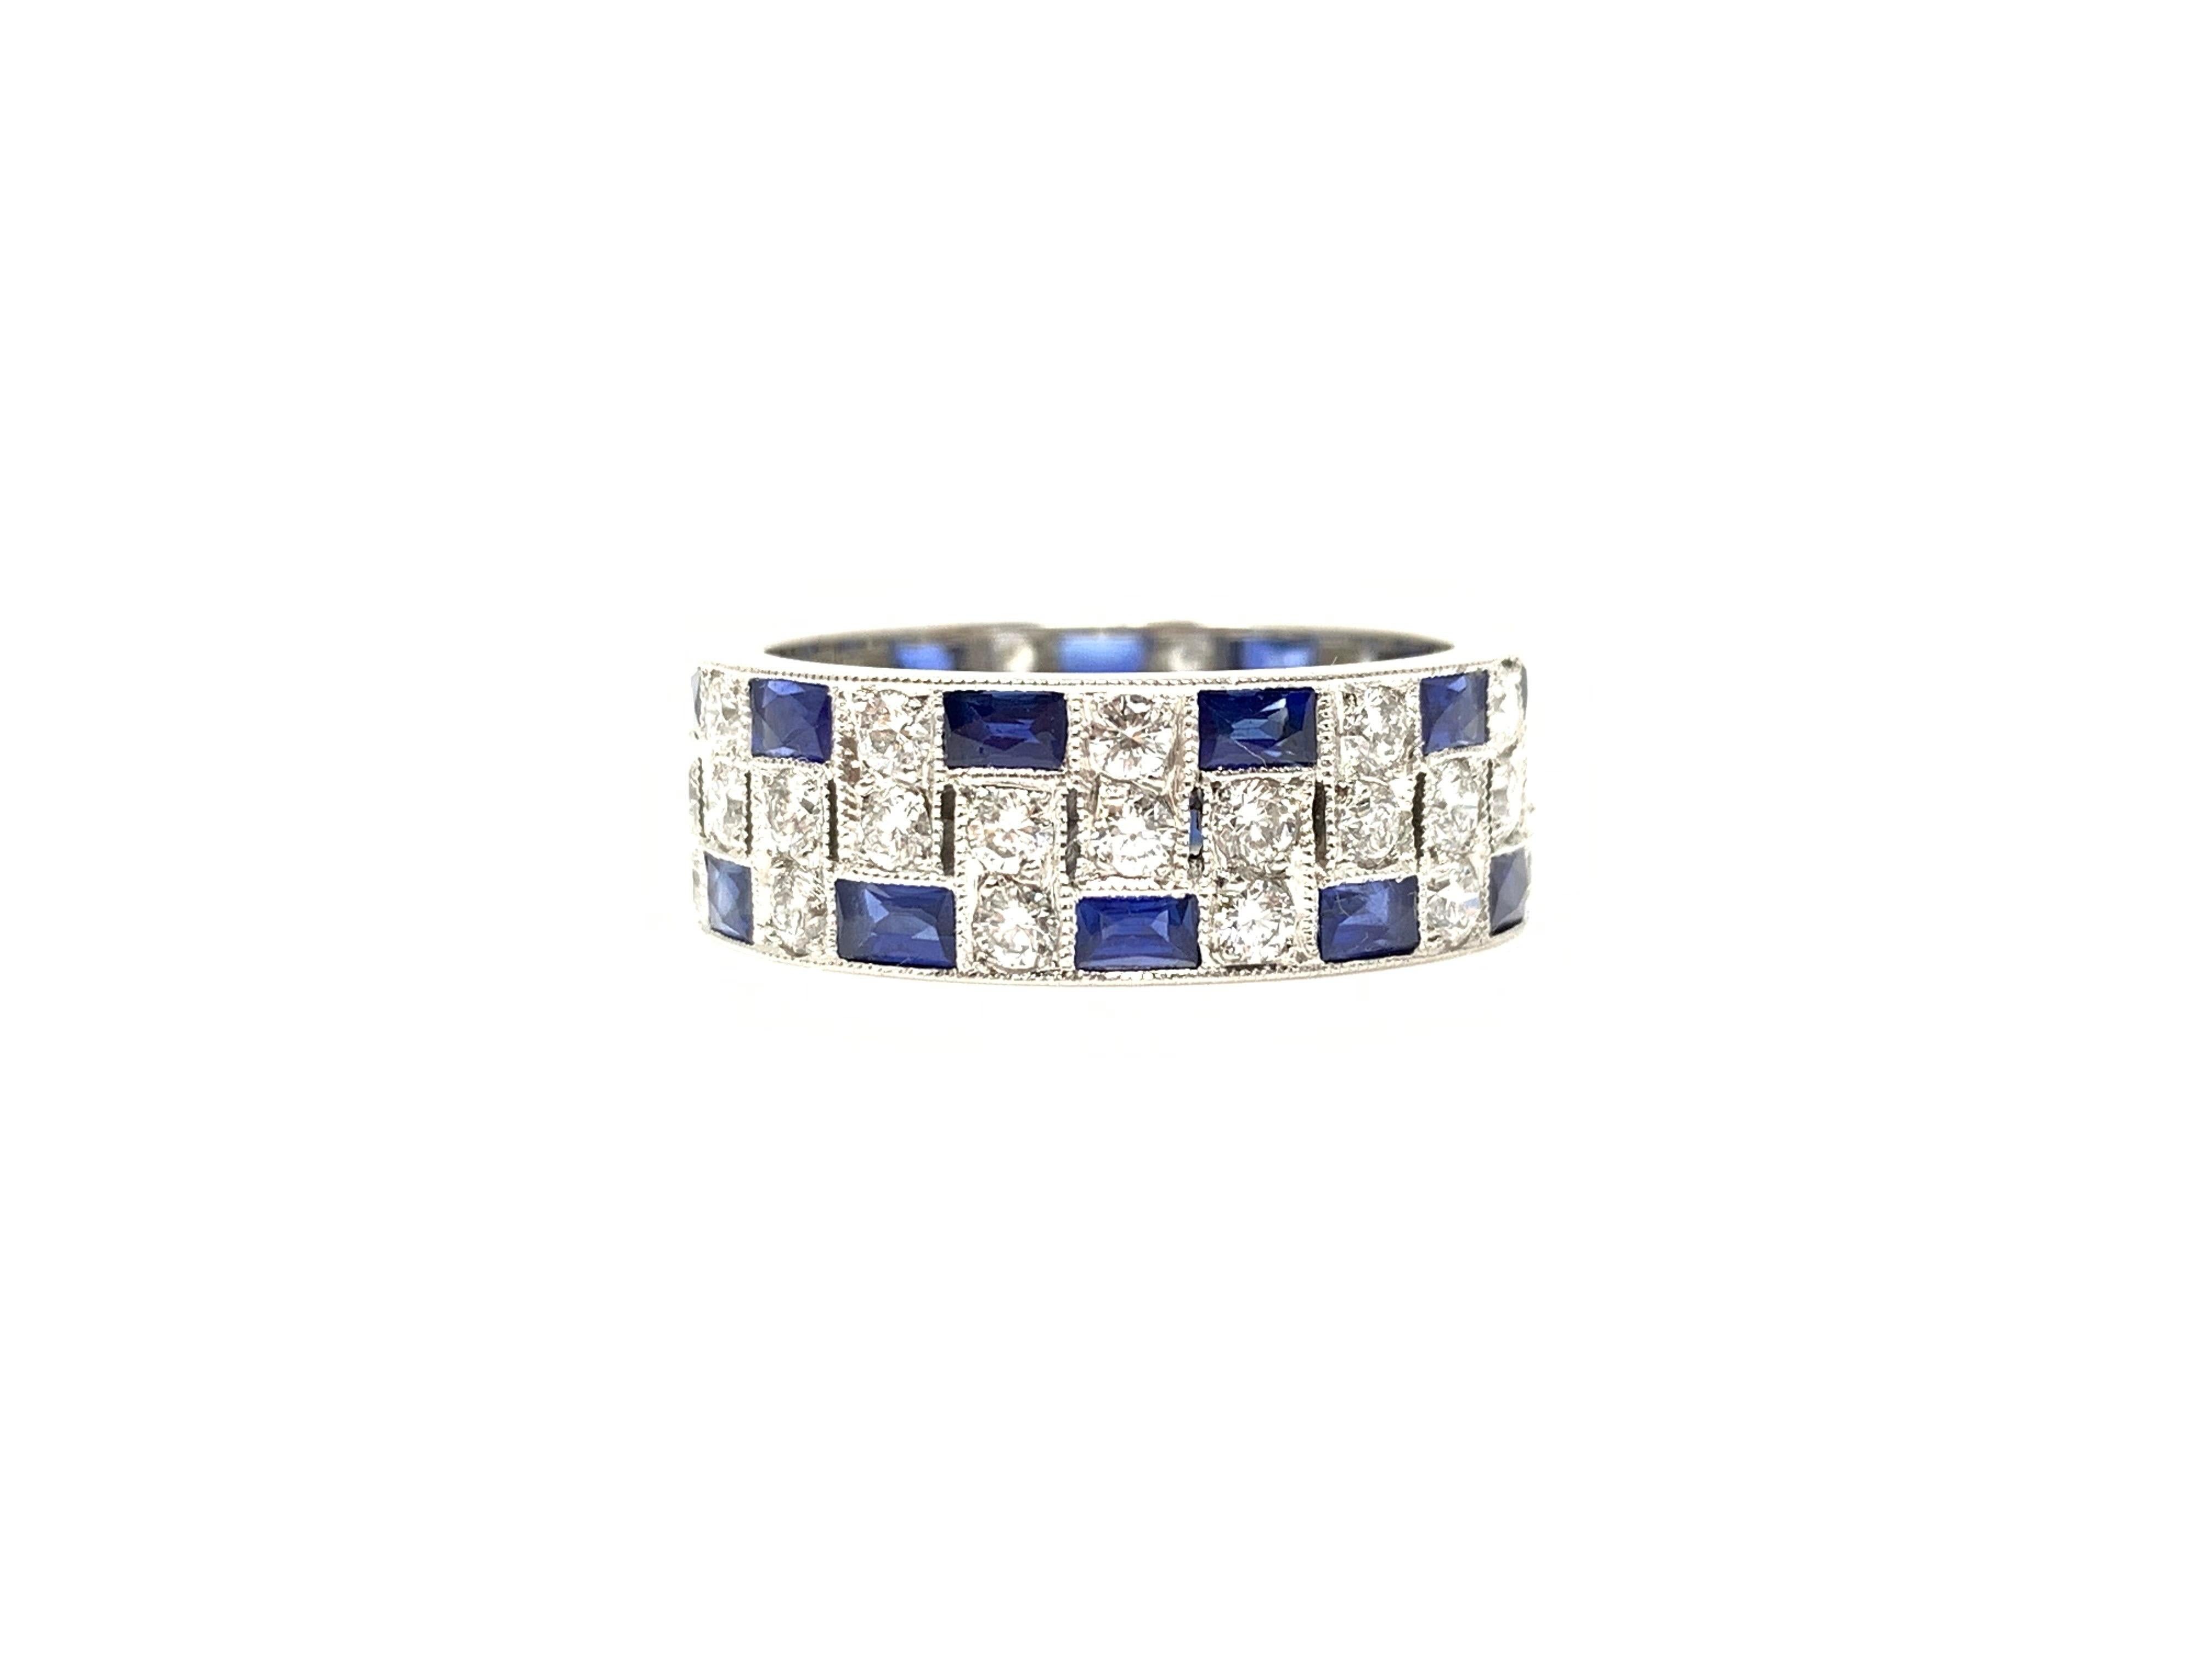 This unique eternity band is set with white diamonds and beautiful blue sapphire baguettes. The extremely well hand crafted platinum mounting has white diamonds weighing 1.81 carat with GH color and VS clarity and blue sapphire baguettes weighing